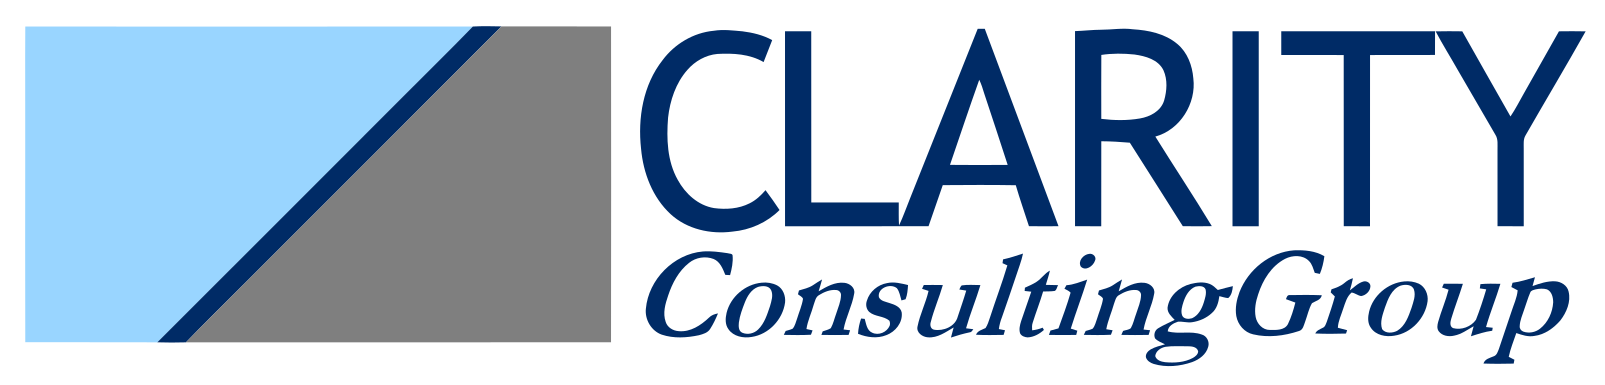 Clarity Consulting